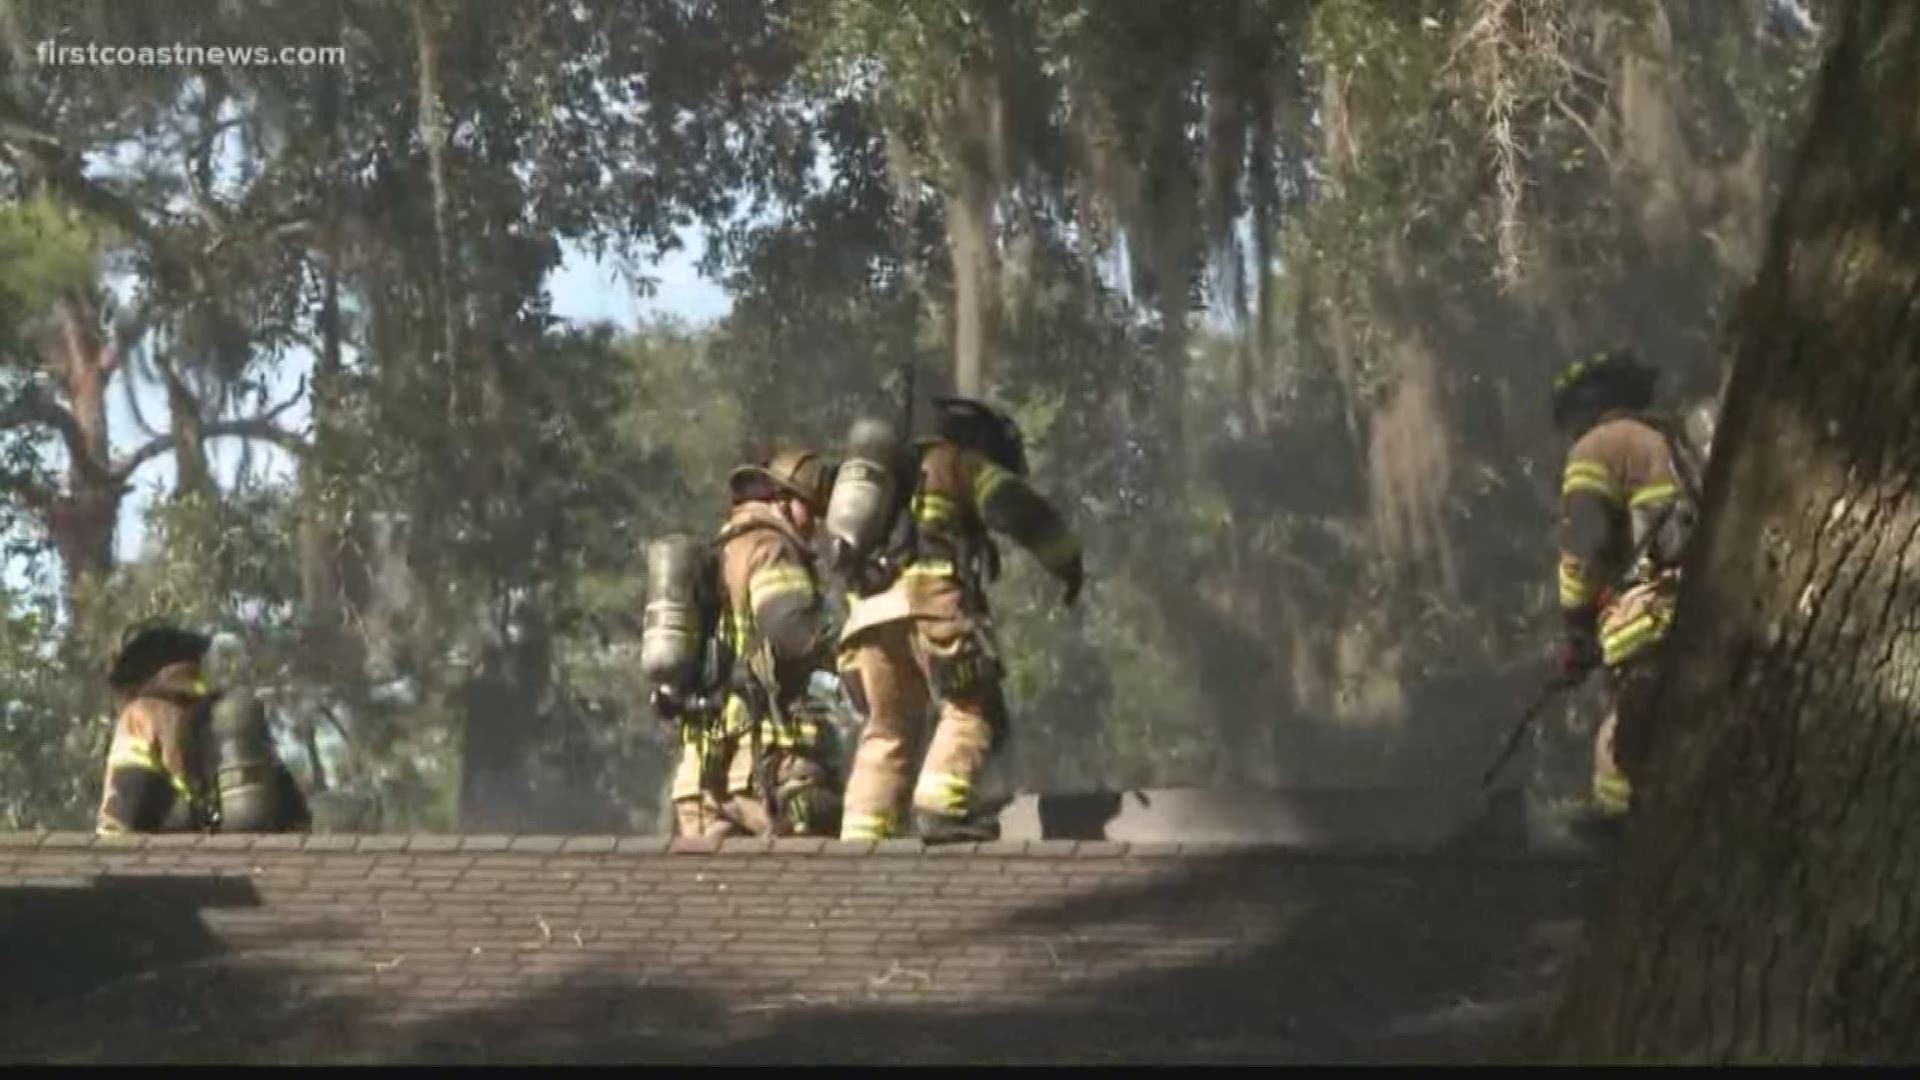 Around 10 a.m., Jacksonville Fire and Rescue Department crews responded to the 6900 block of Salamanca Avenue and advised that heavy smoke was showing from a home.